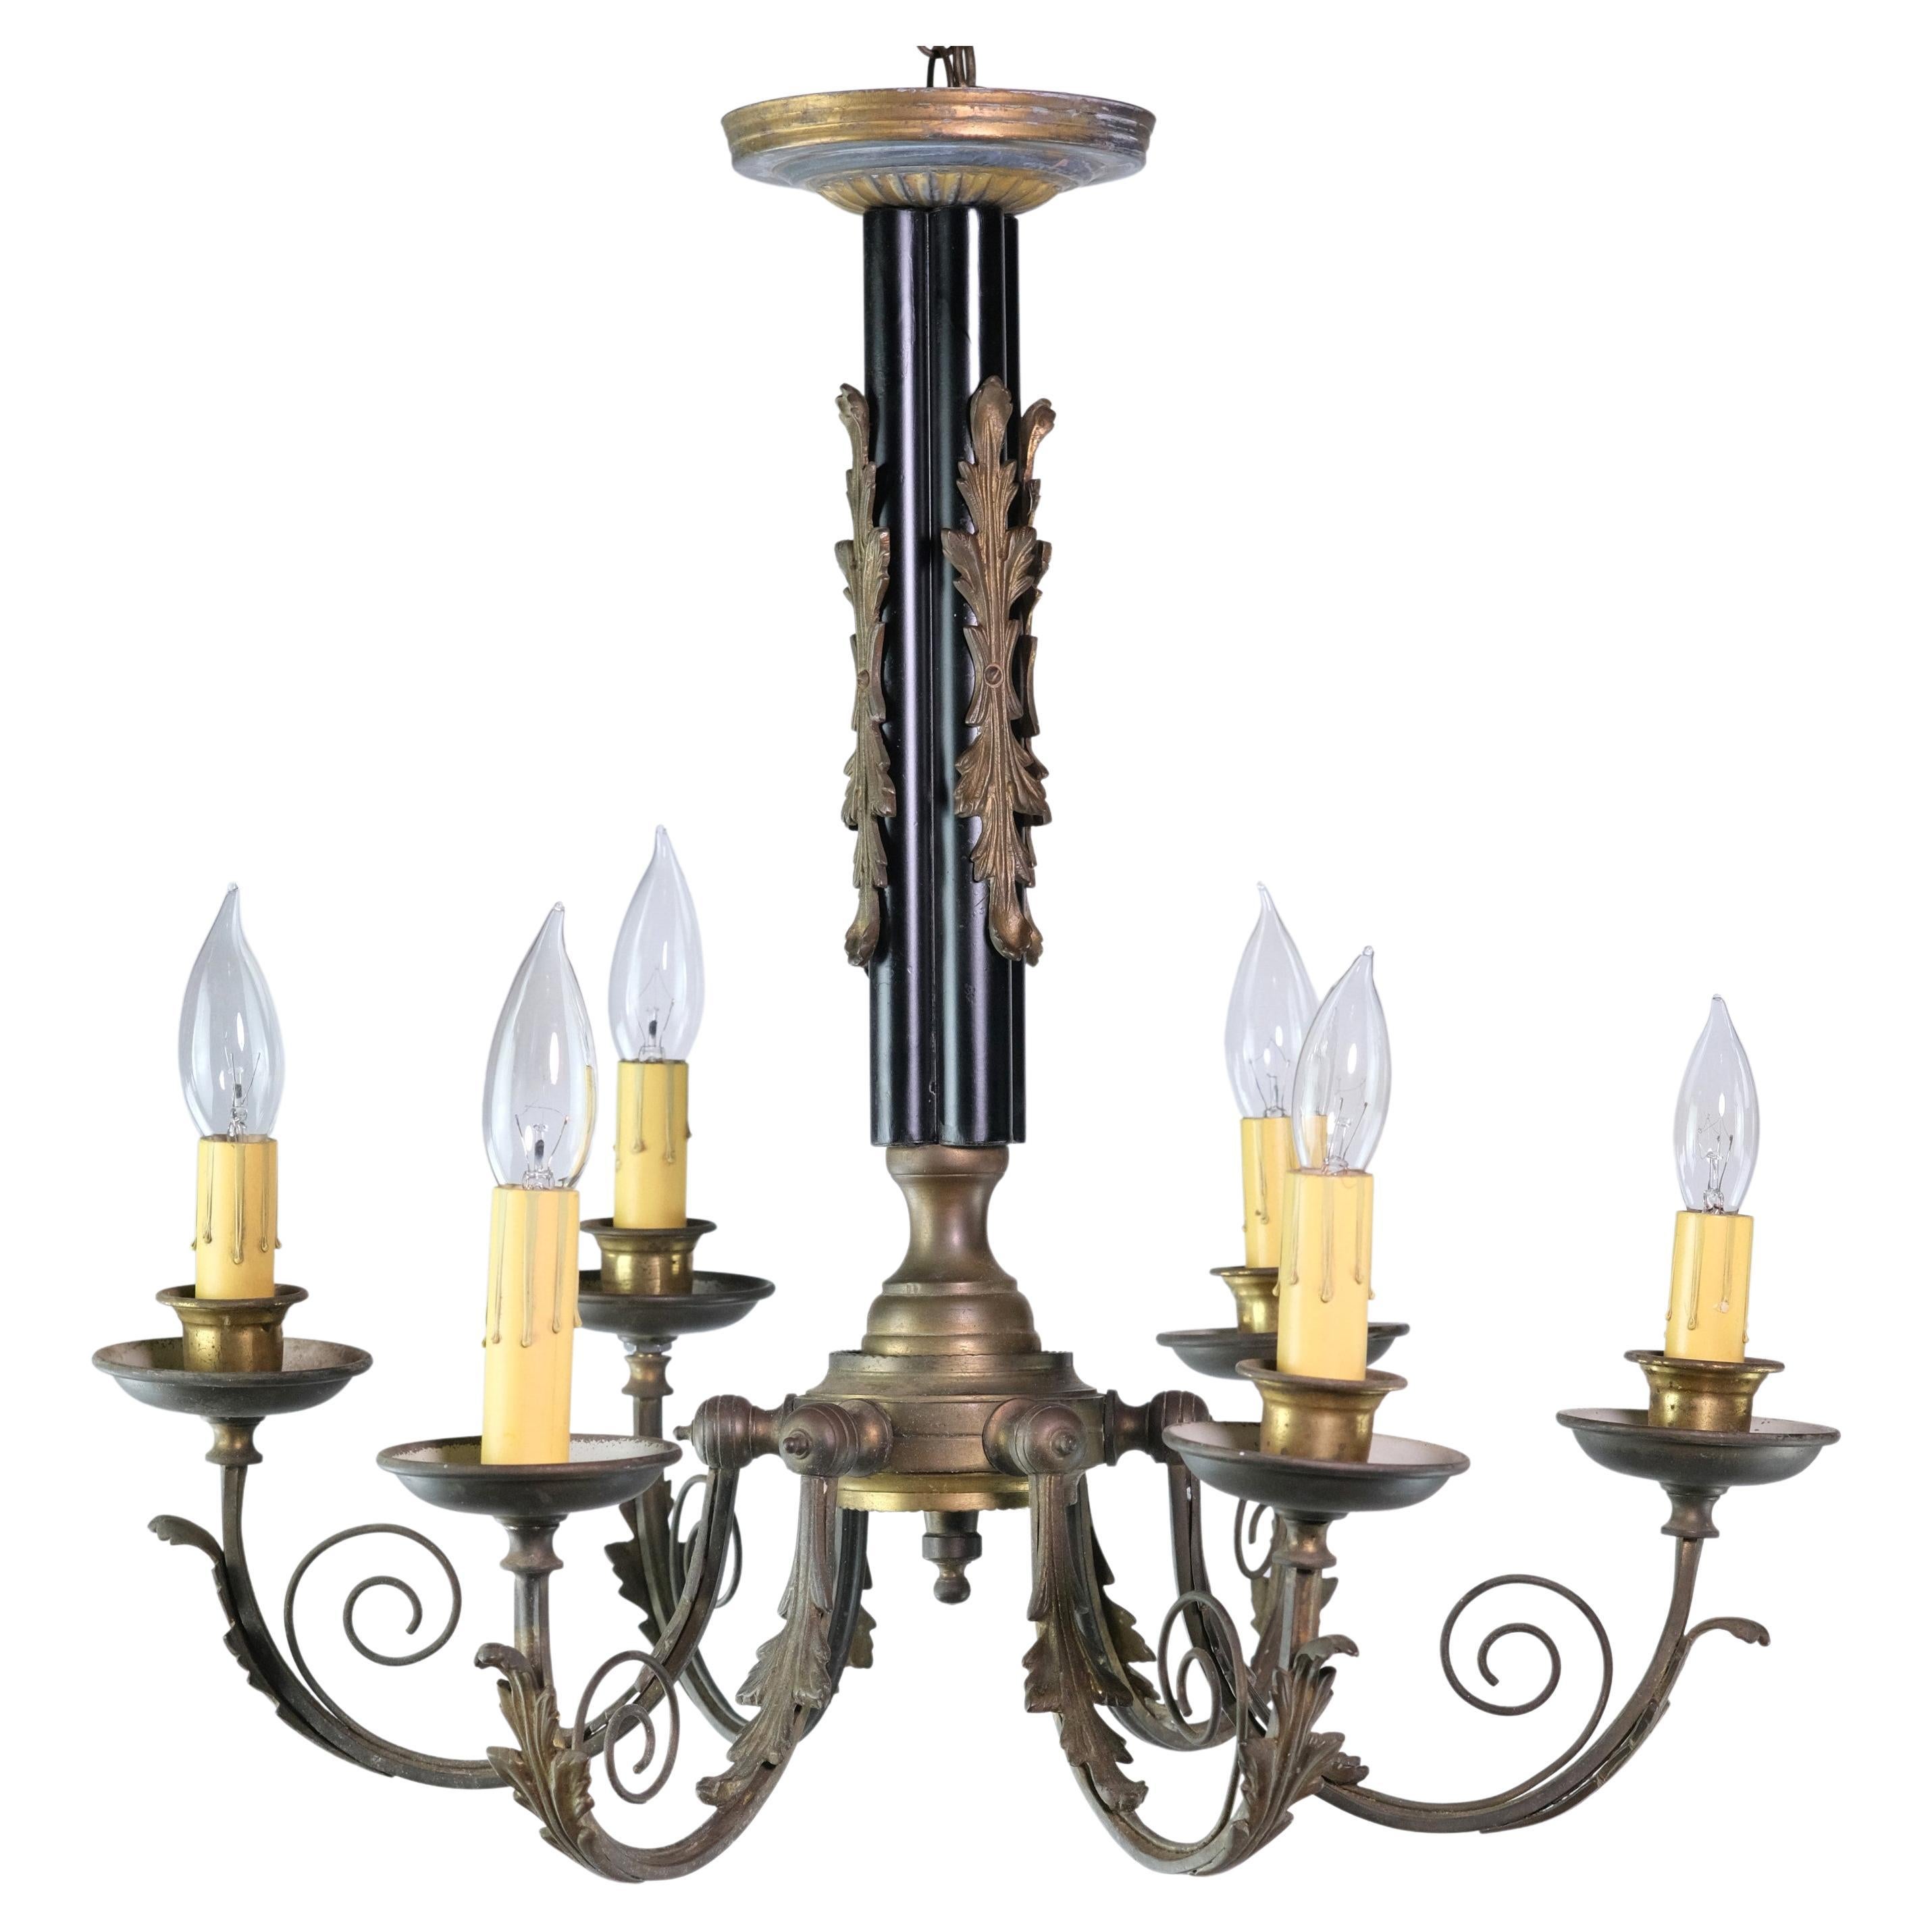 French 6 Arm Scrolled Foliage Floral Brass Chandelier